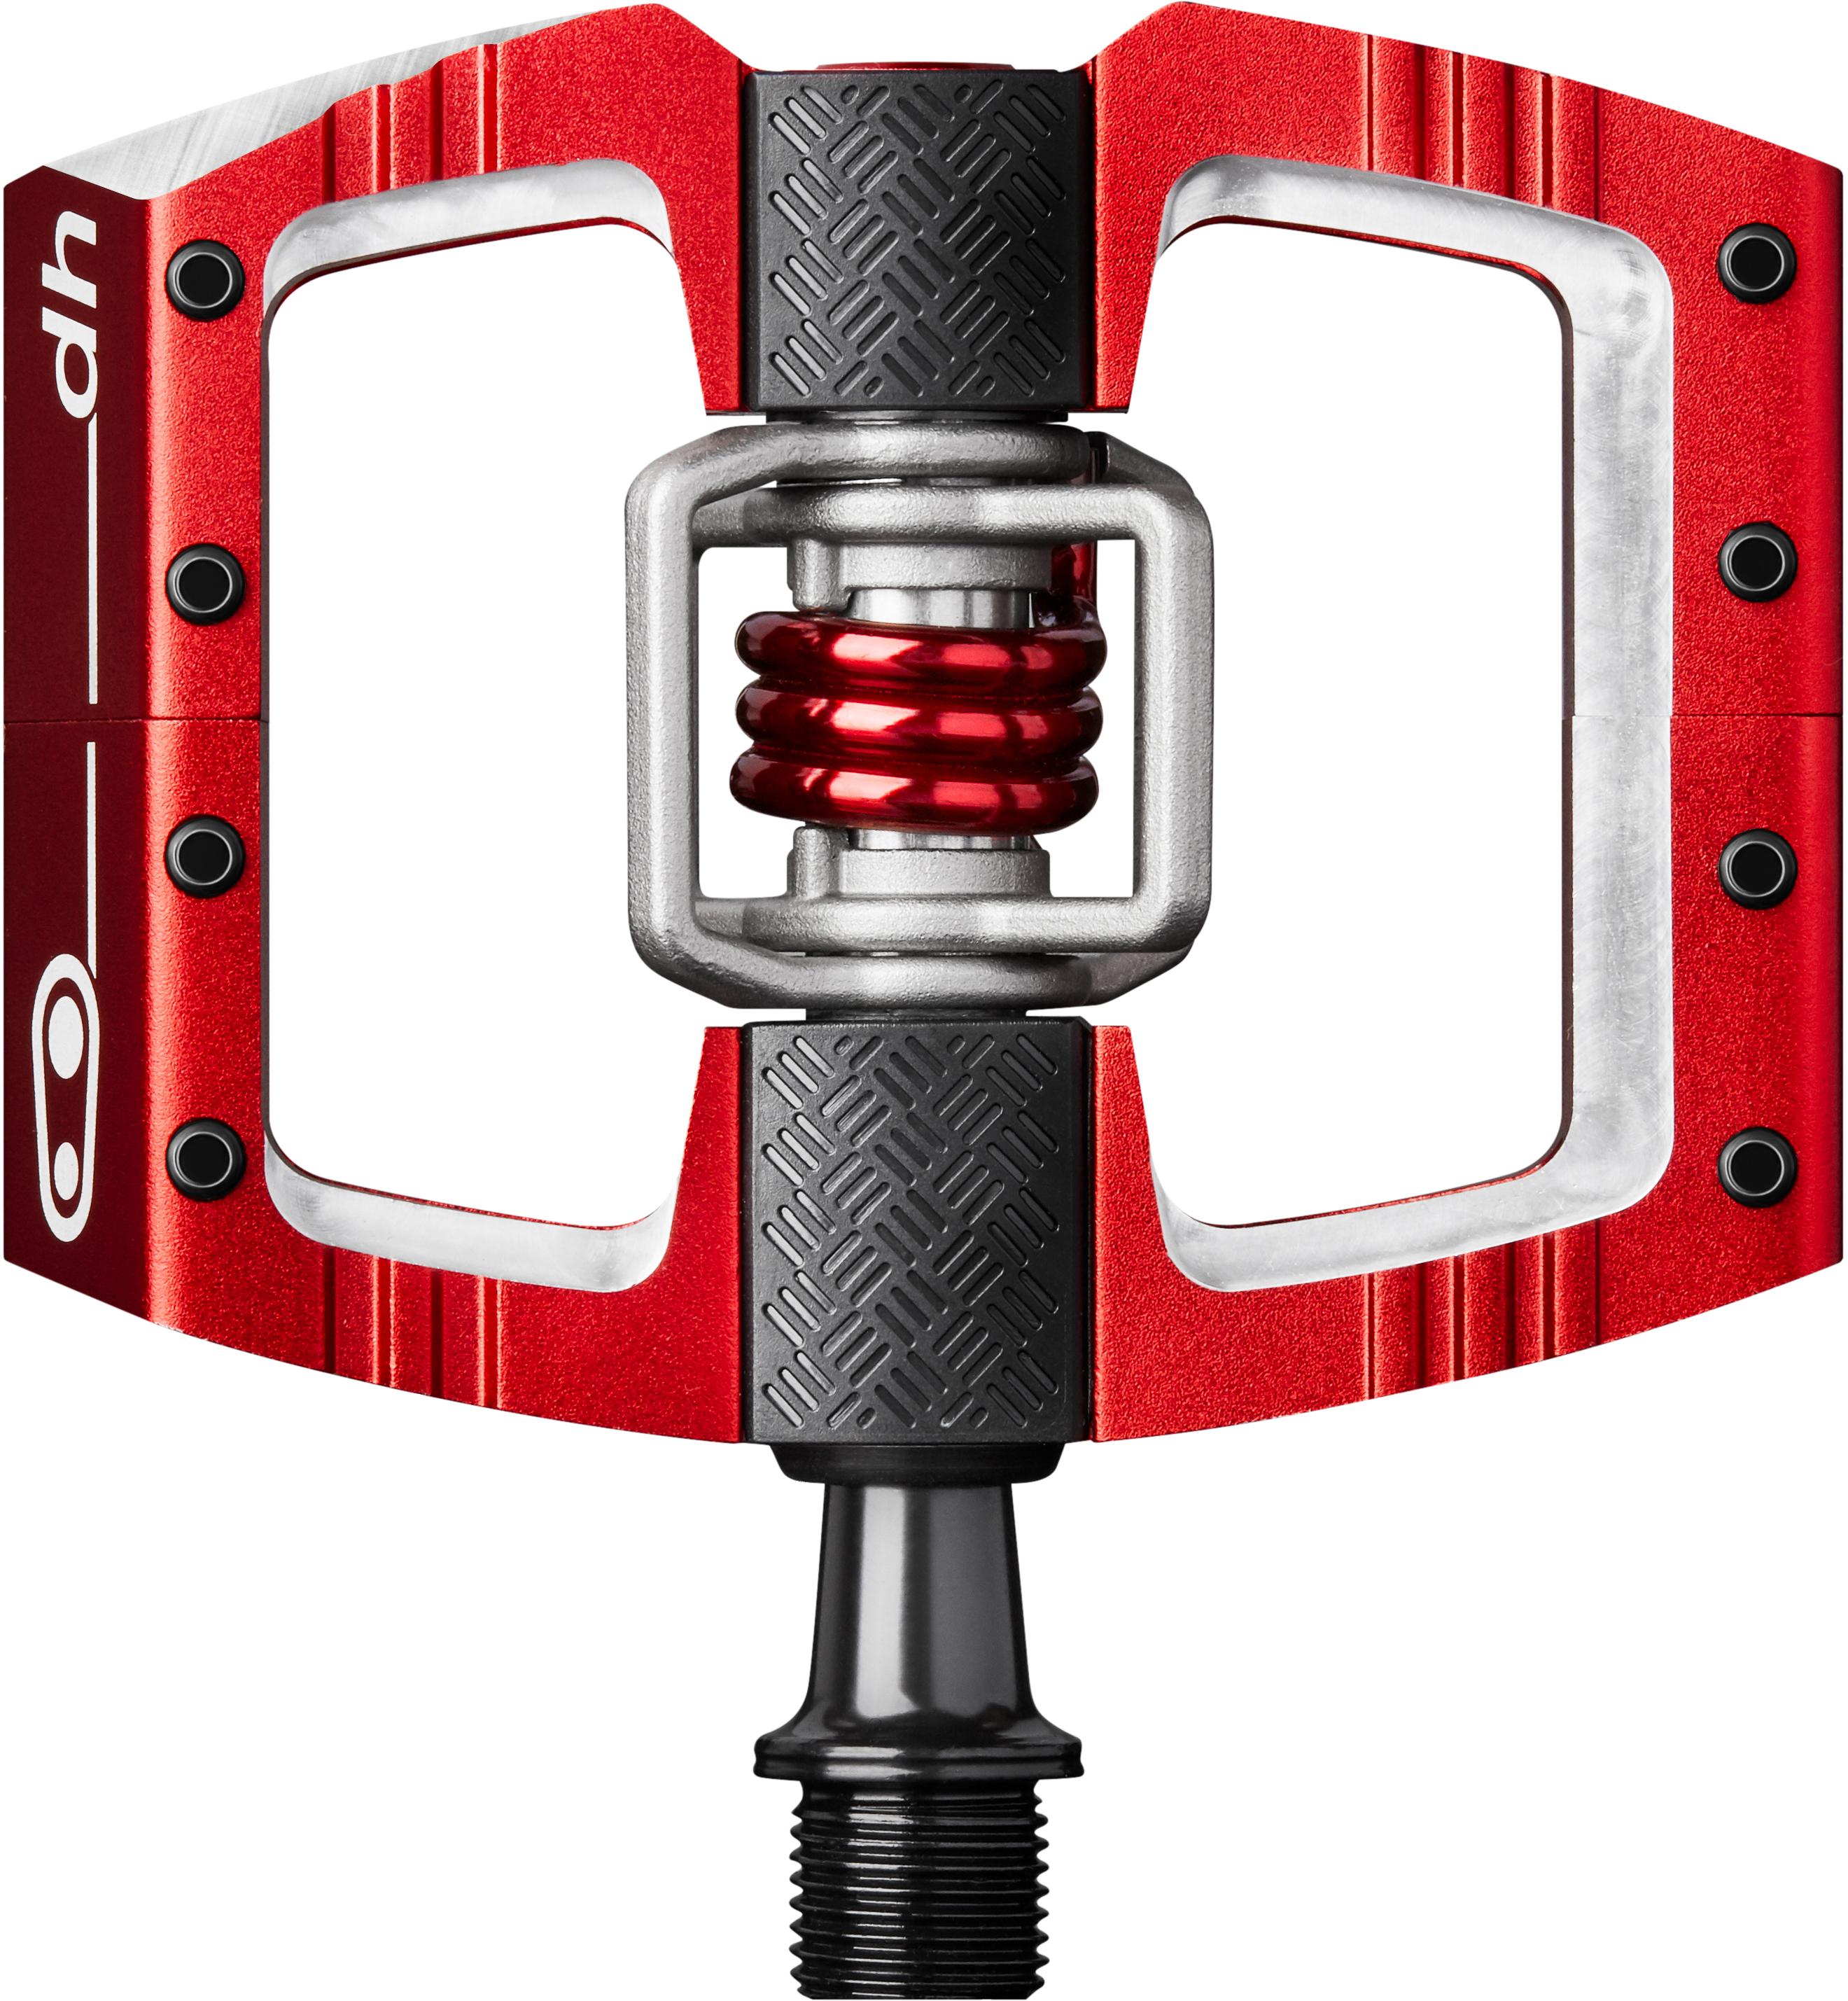 Crankbrothers Mallet Dh Pedals, Red